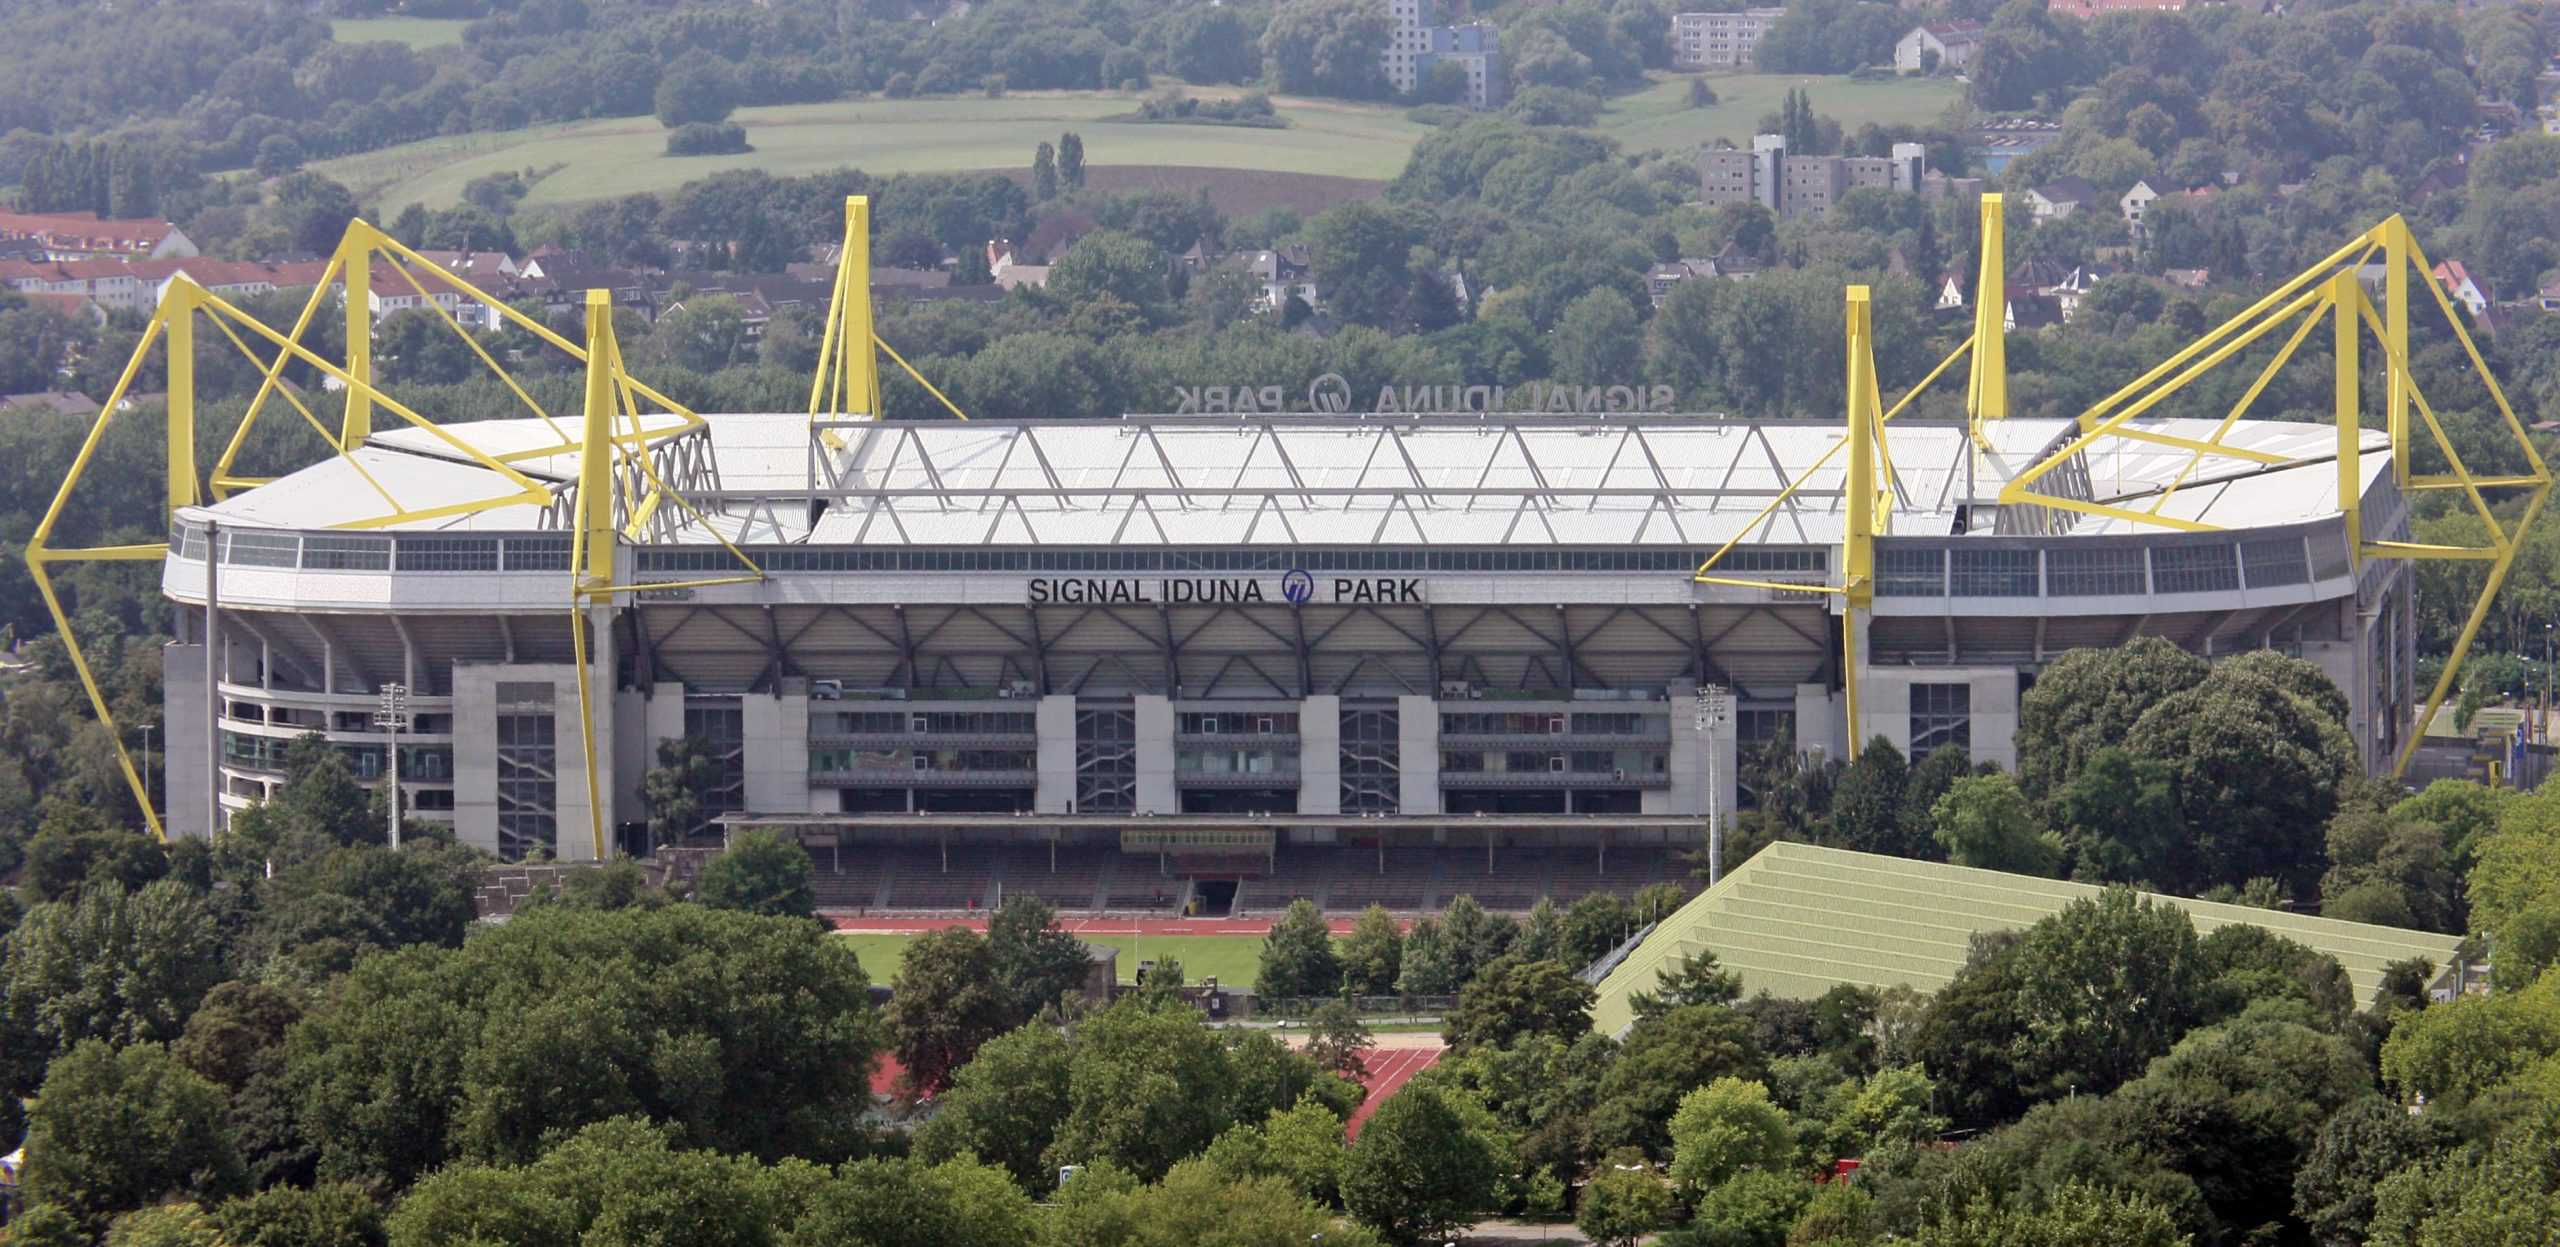 <p><strong>Year Construction Began:</strong> 1971</p>    <p><strong>Construction Completion:</strong> 1976</p>    <p>Signal Iduna Park is in Dortmund City, Germany. Dortmund is known for its soccer team, beer culture, and rich industrial heritage. </p><p>Remember to scroll up and hit the ‘Follow’ button to keep up with the newest stories from Seattle Travel on your Microsoft Start feed or MSN homepage!</p>